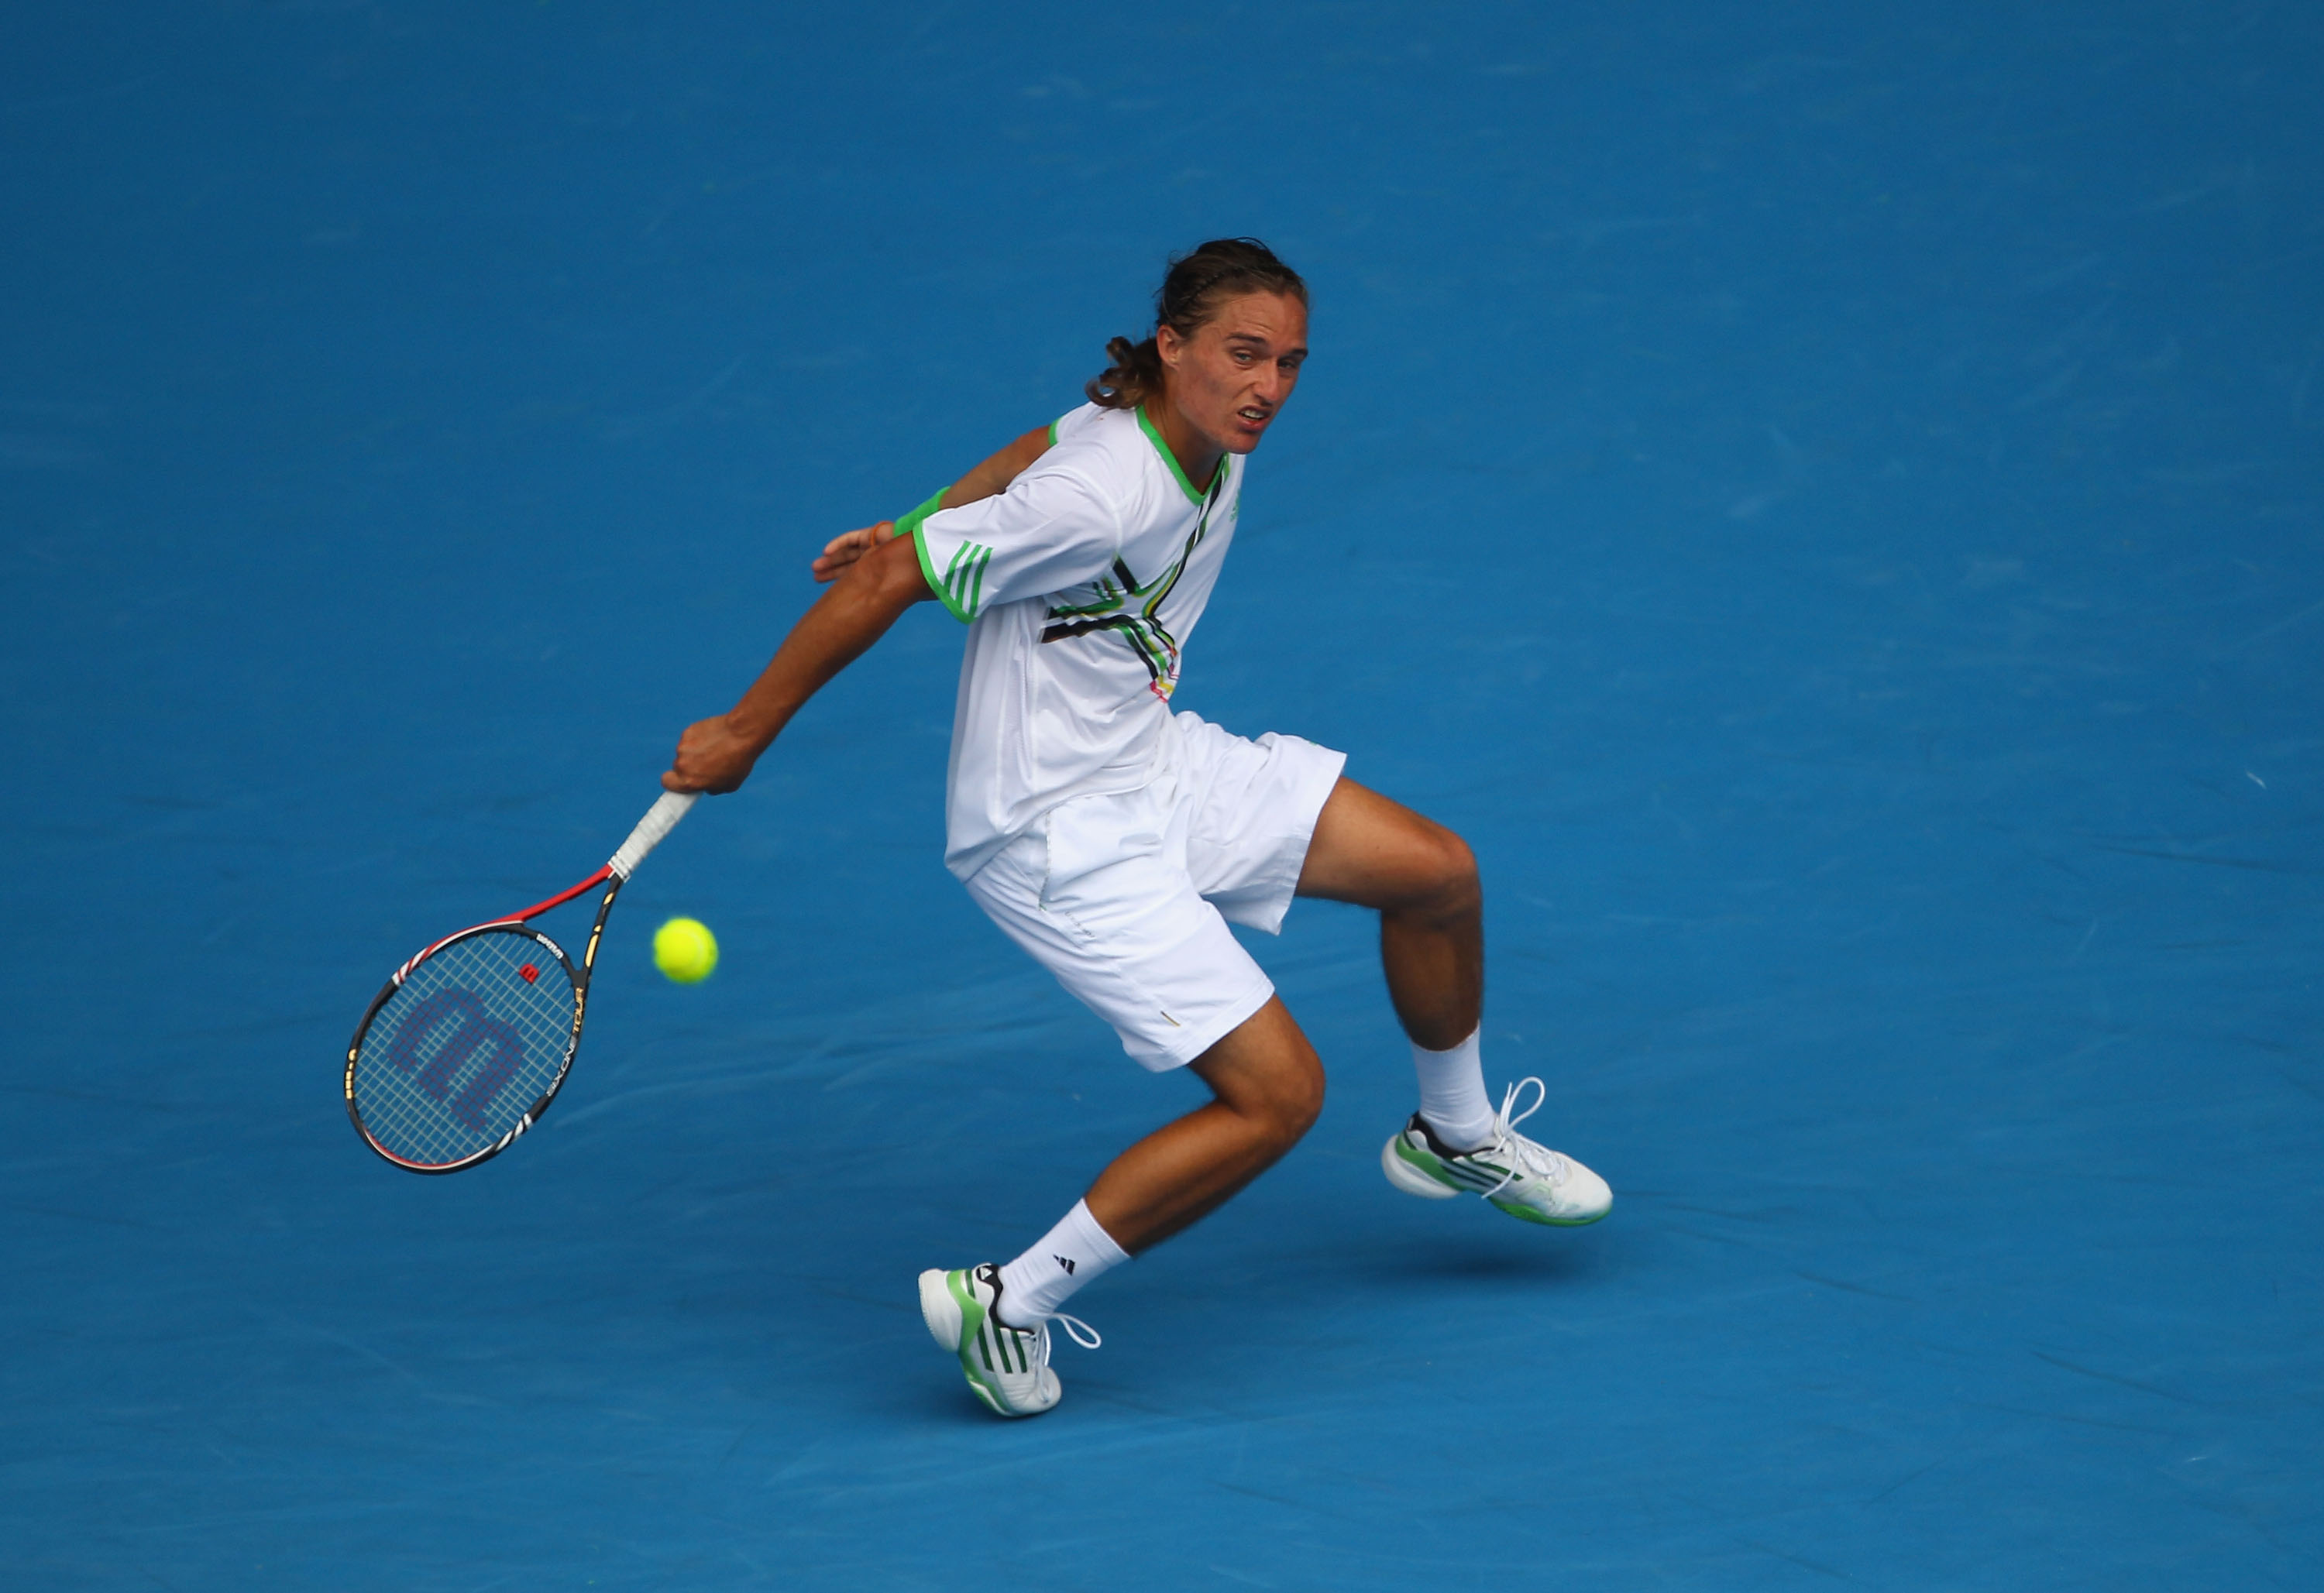 MELBOURNE, AUSTRALIA - JANUARY 26:  Alexandr Dolgopolov of the Ukraine plays a backhand in his quarterfinal match against Andy Murray of Great Britain during day ten of the 2011 Australian Open at Melbourne Park on January 26, 2011 in Melbourne, Australia